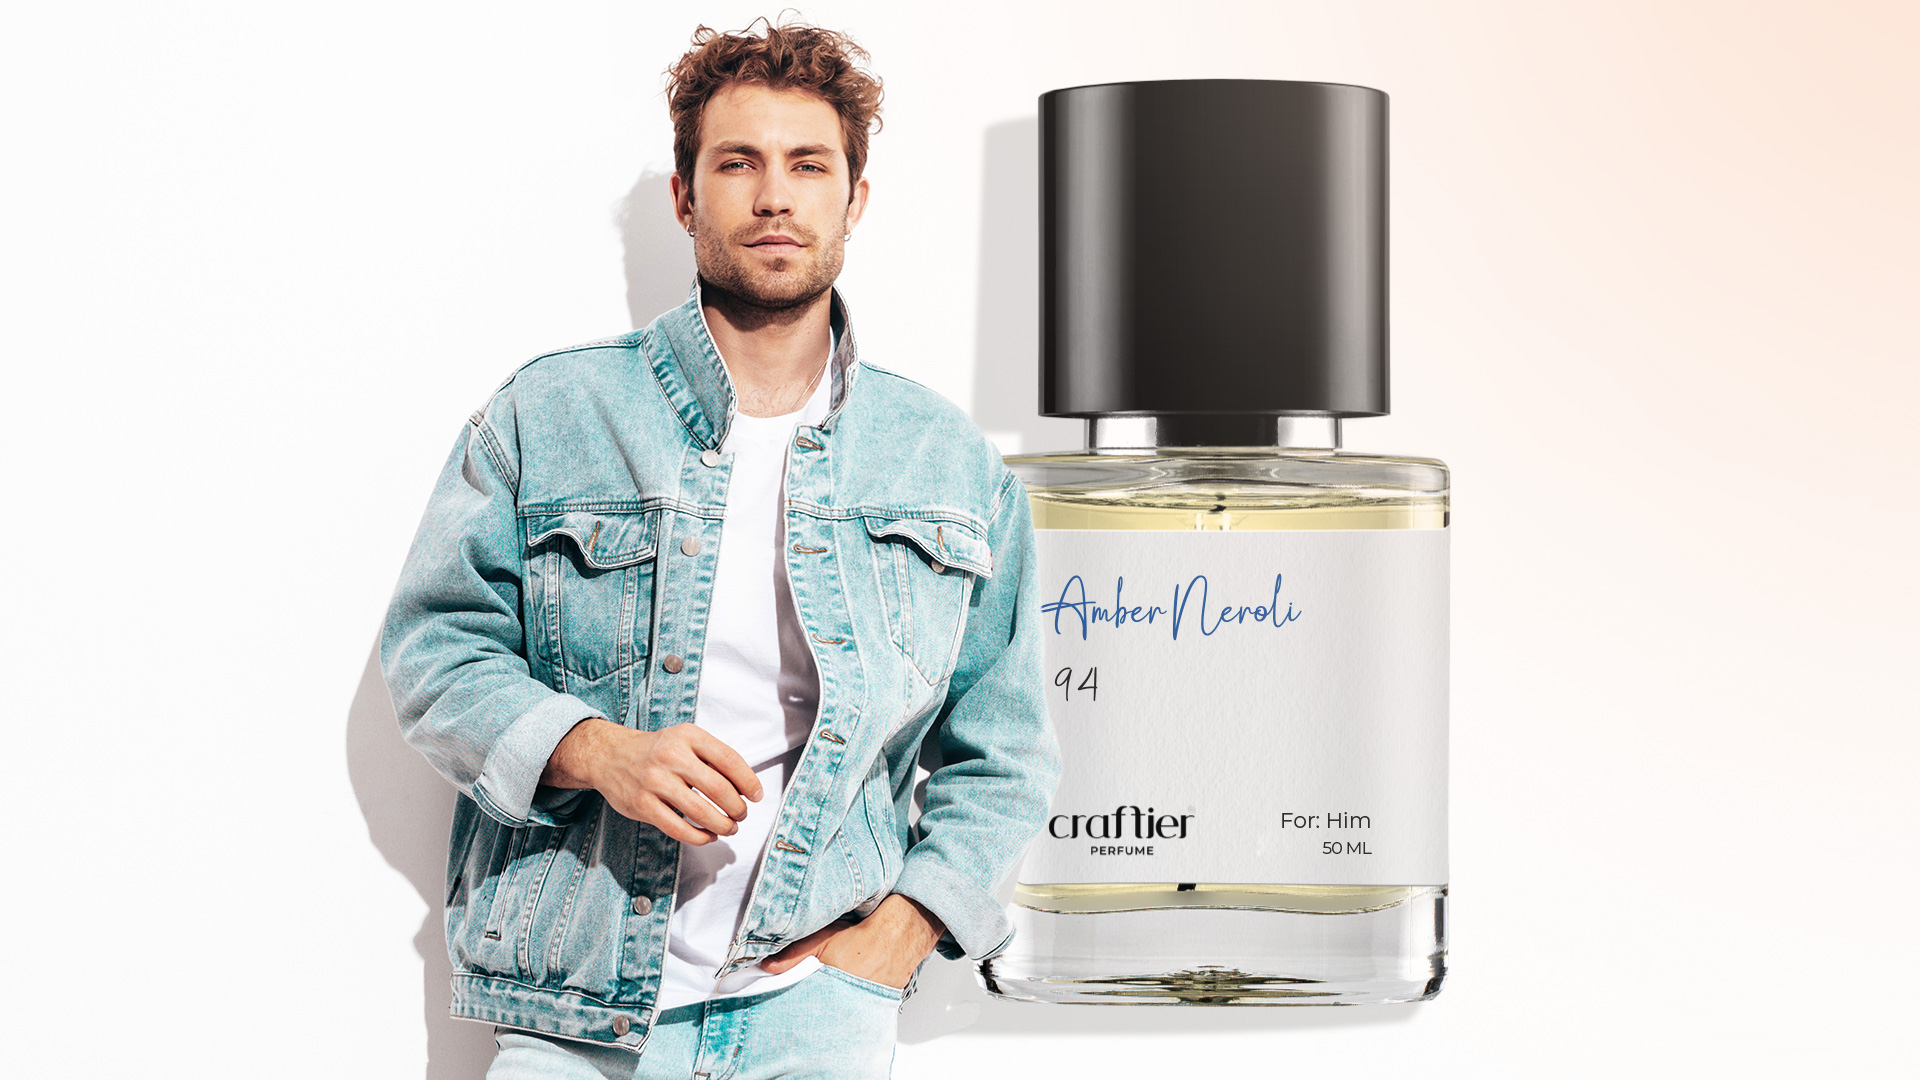 Perfect Fragrance for Your Upcoming Meeting: Shop Perfumes for Men from Our Popular Perfume Shop ​